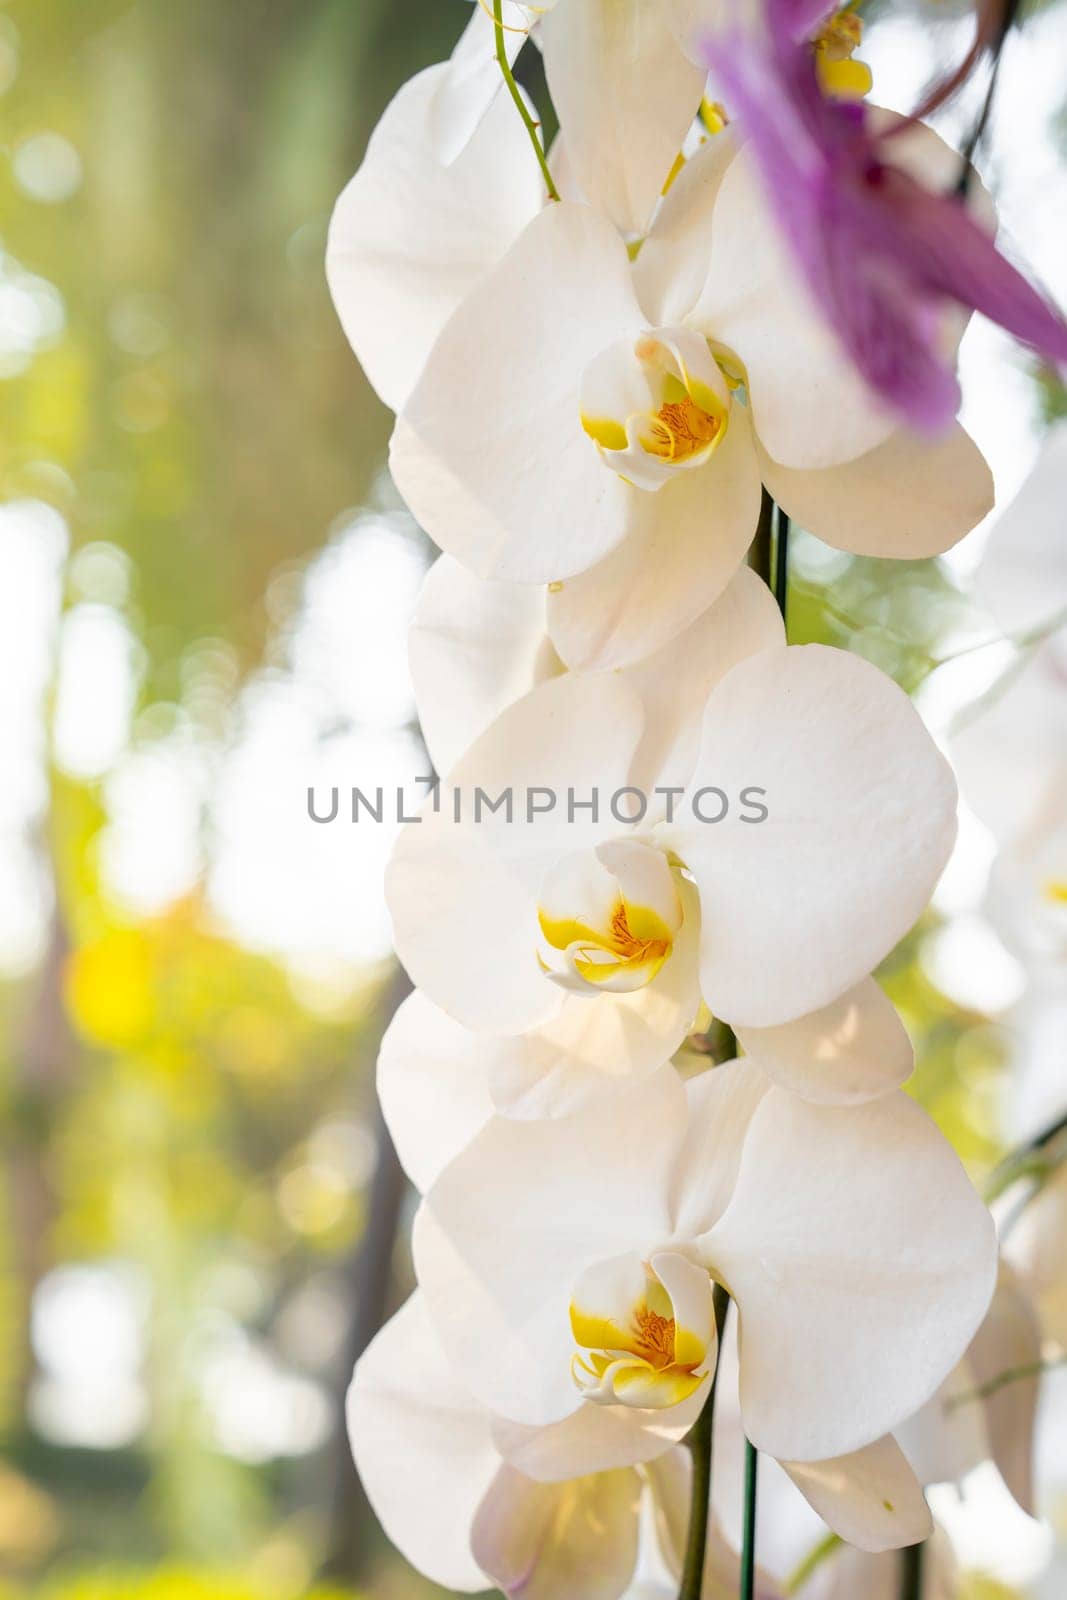 White Phalaenopsis orchid flowers on a background of leaves.